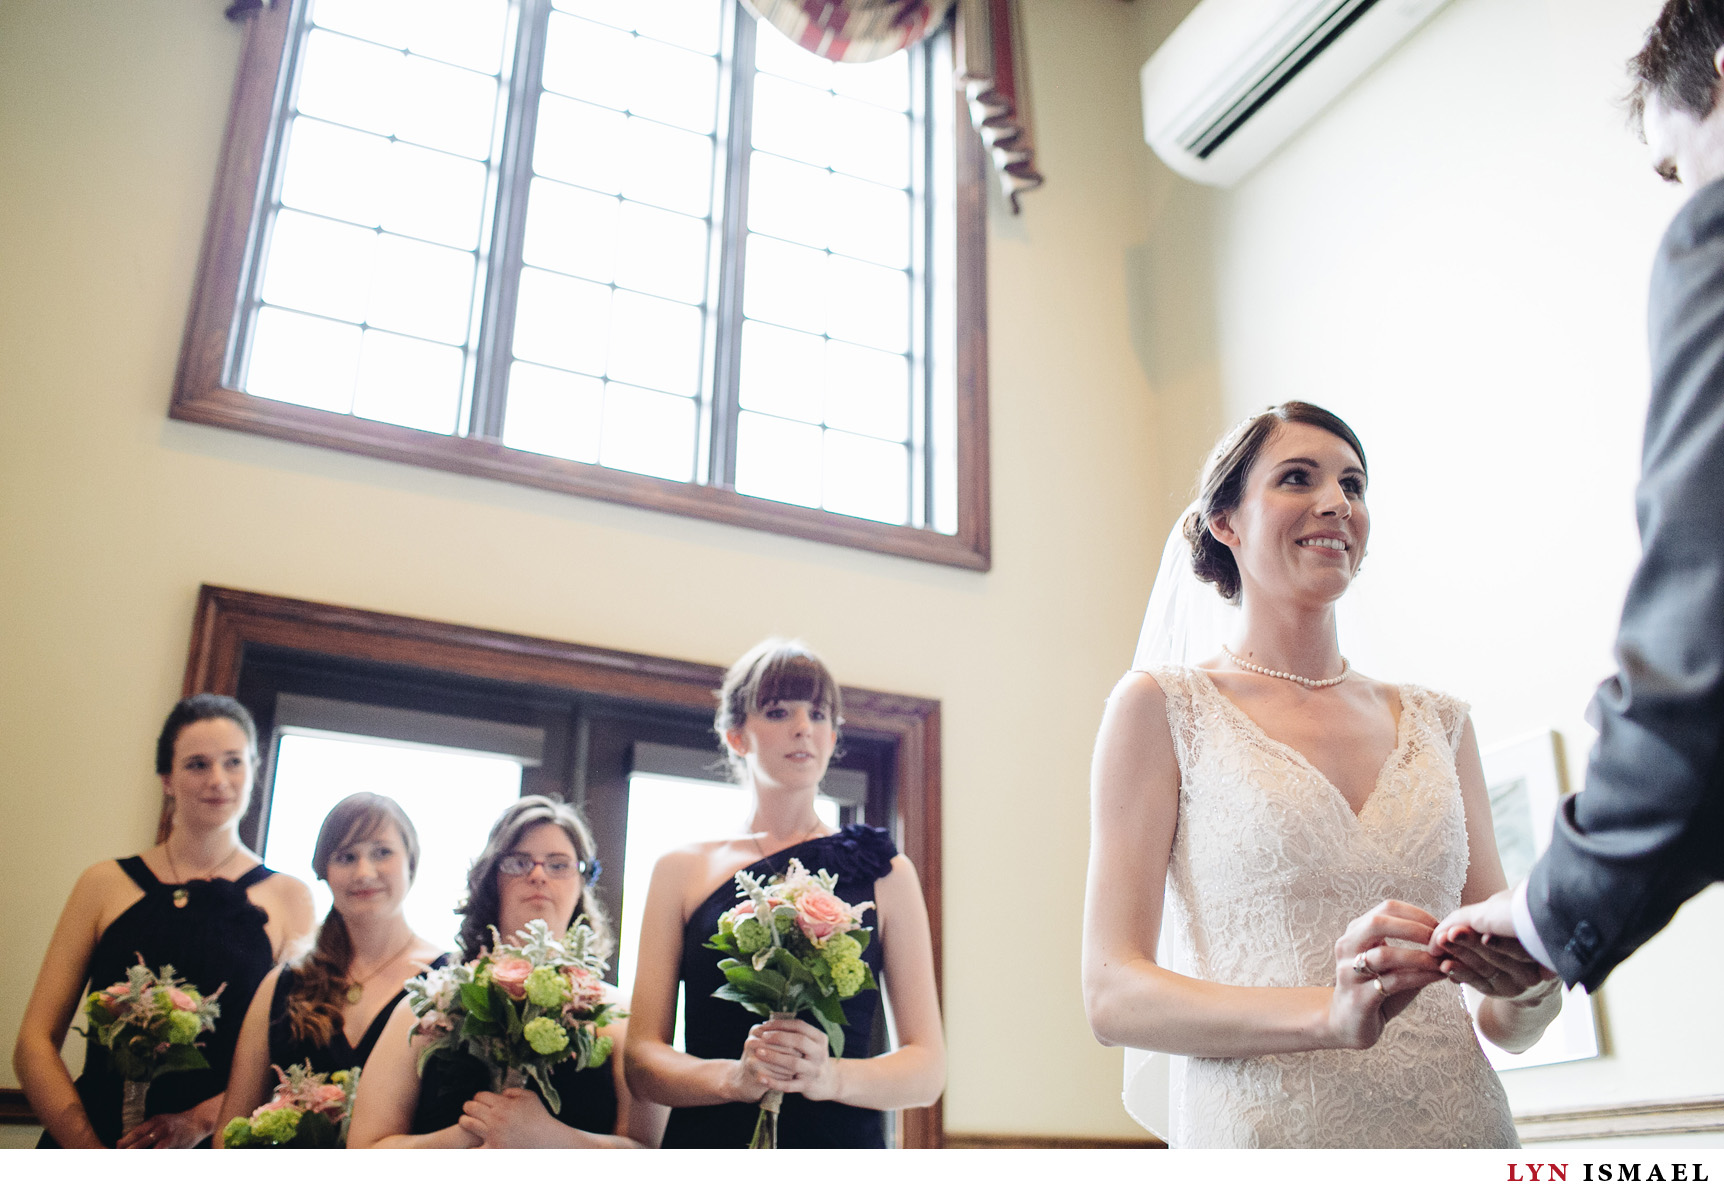 The bridesmaids watched as their friend got married.